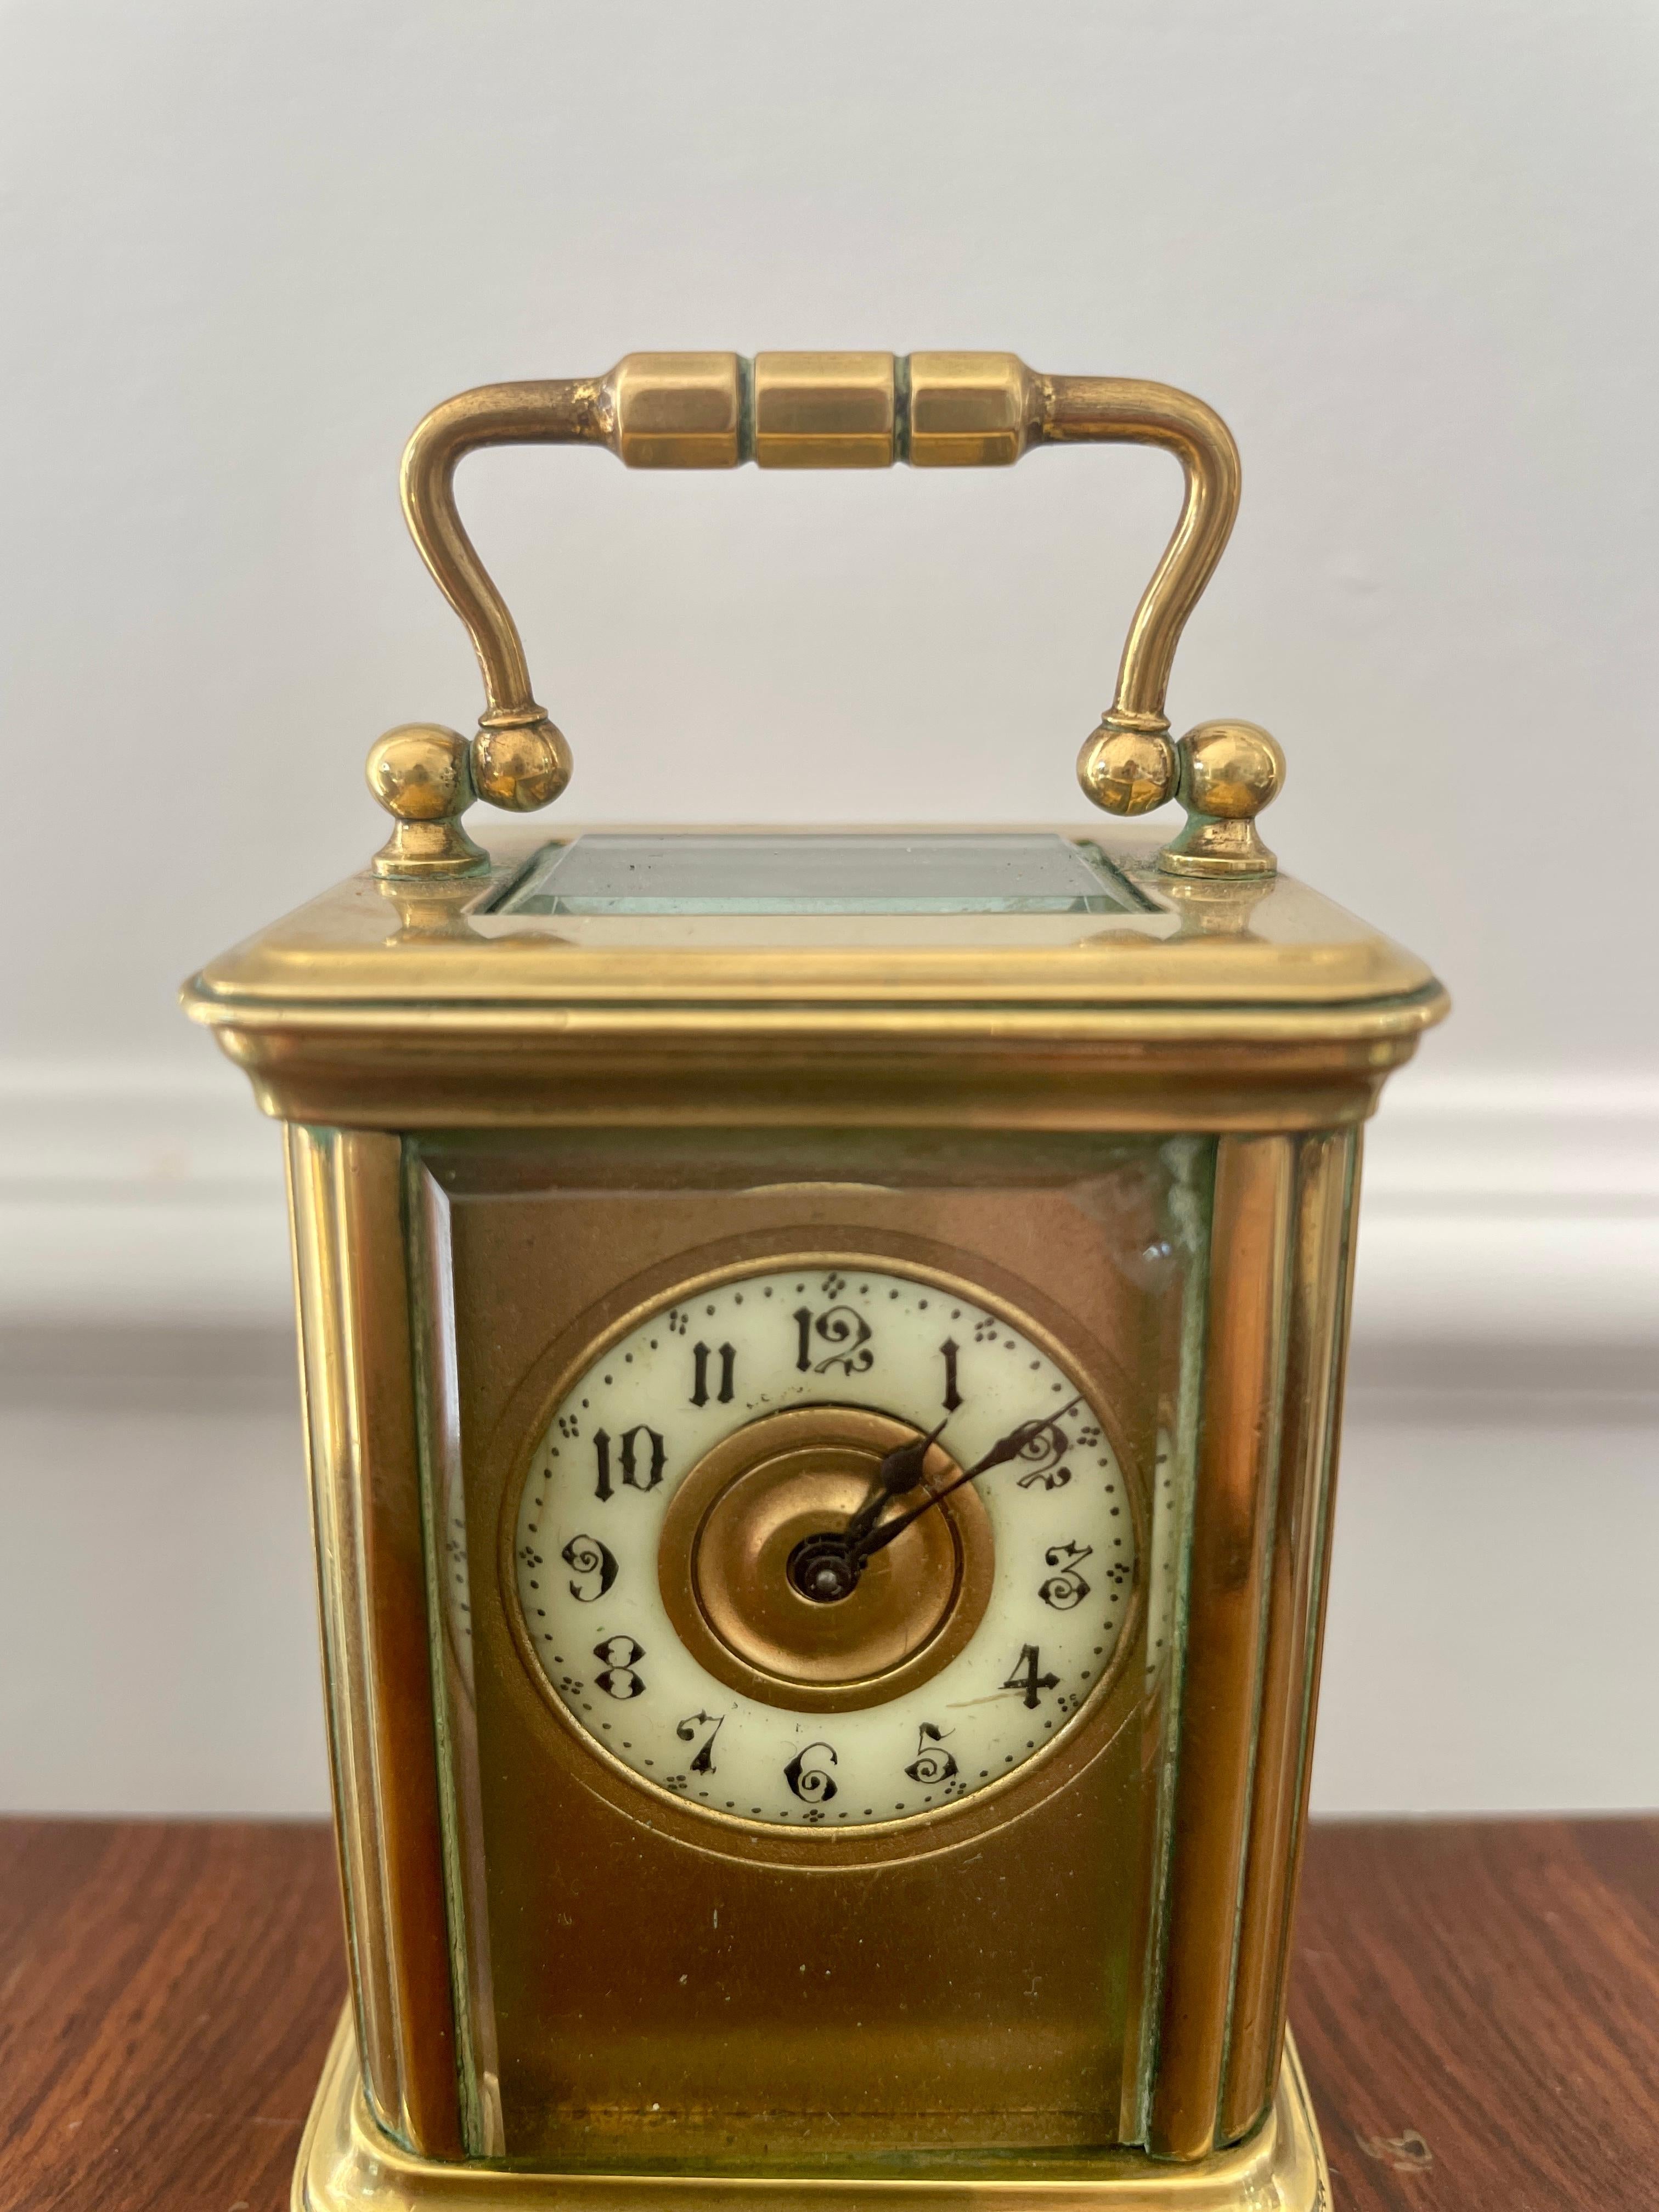 Charming antique miniature lacquered brass cased carriage clock having a pretty enamelled chapter ring and visible platform lever escapement. 

Perfect working order with original key. It has a small chip to the glass (top right) which does not